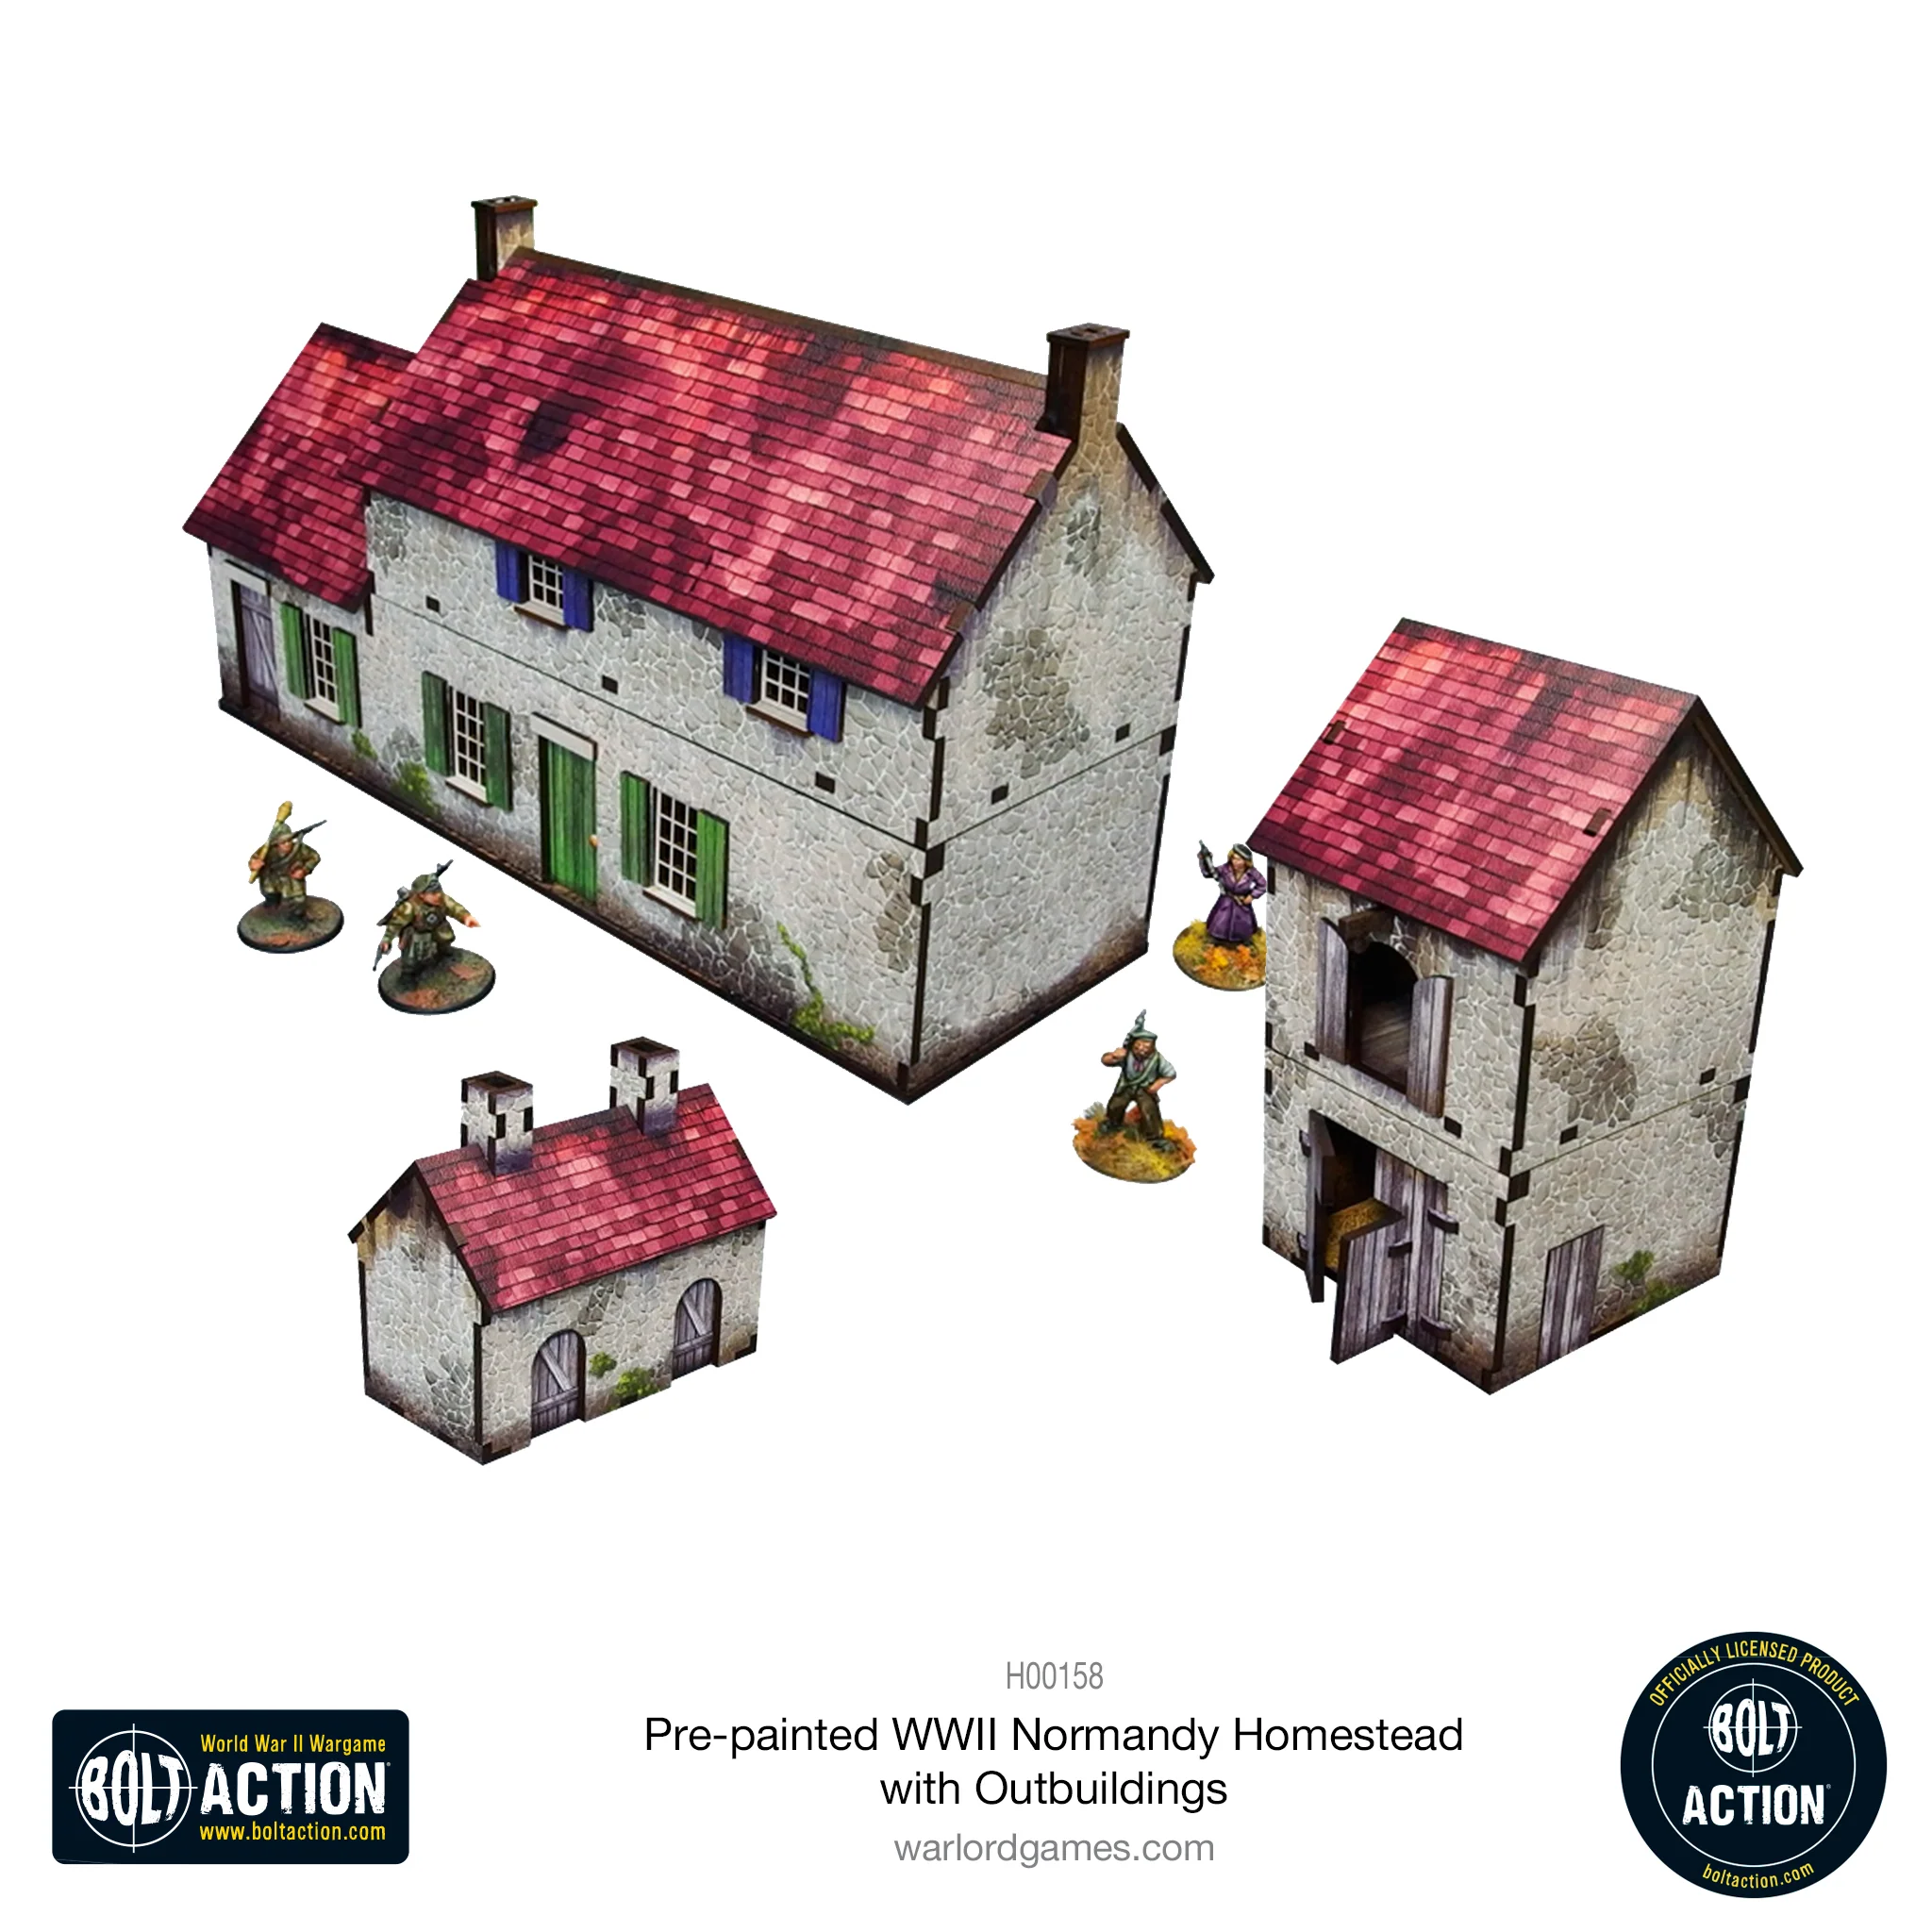 Bolt Action: Pre-painted WWII Normandy Homestead with Outbuildings-1711115668-8OeEN.webp